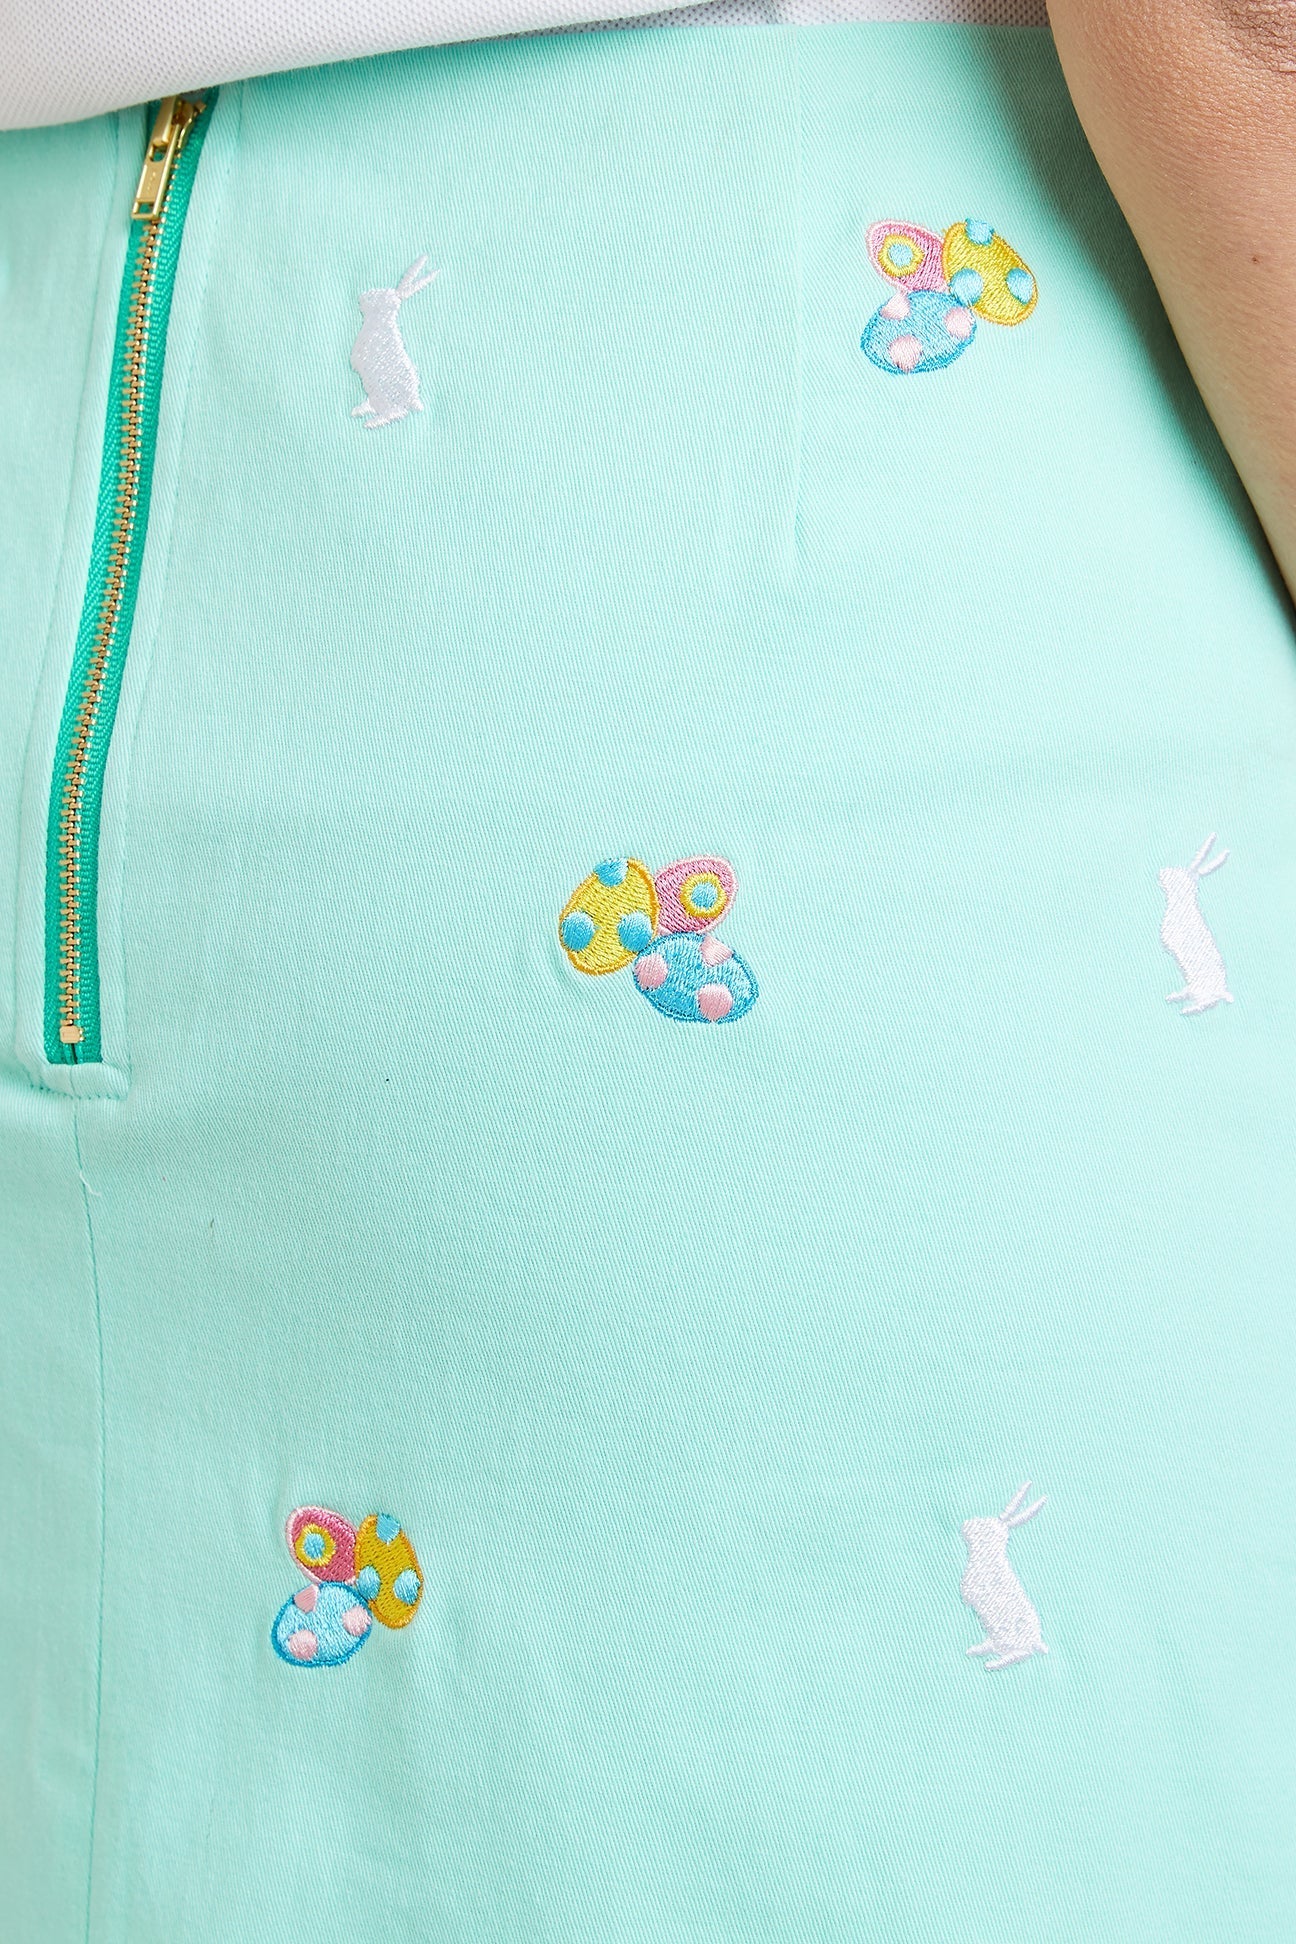 Ali Skirt Stretch Twill Seagrass with Easter Eggs & Bunny LADIES SKIRTS Castaway Nantucket Island